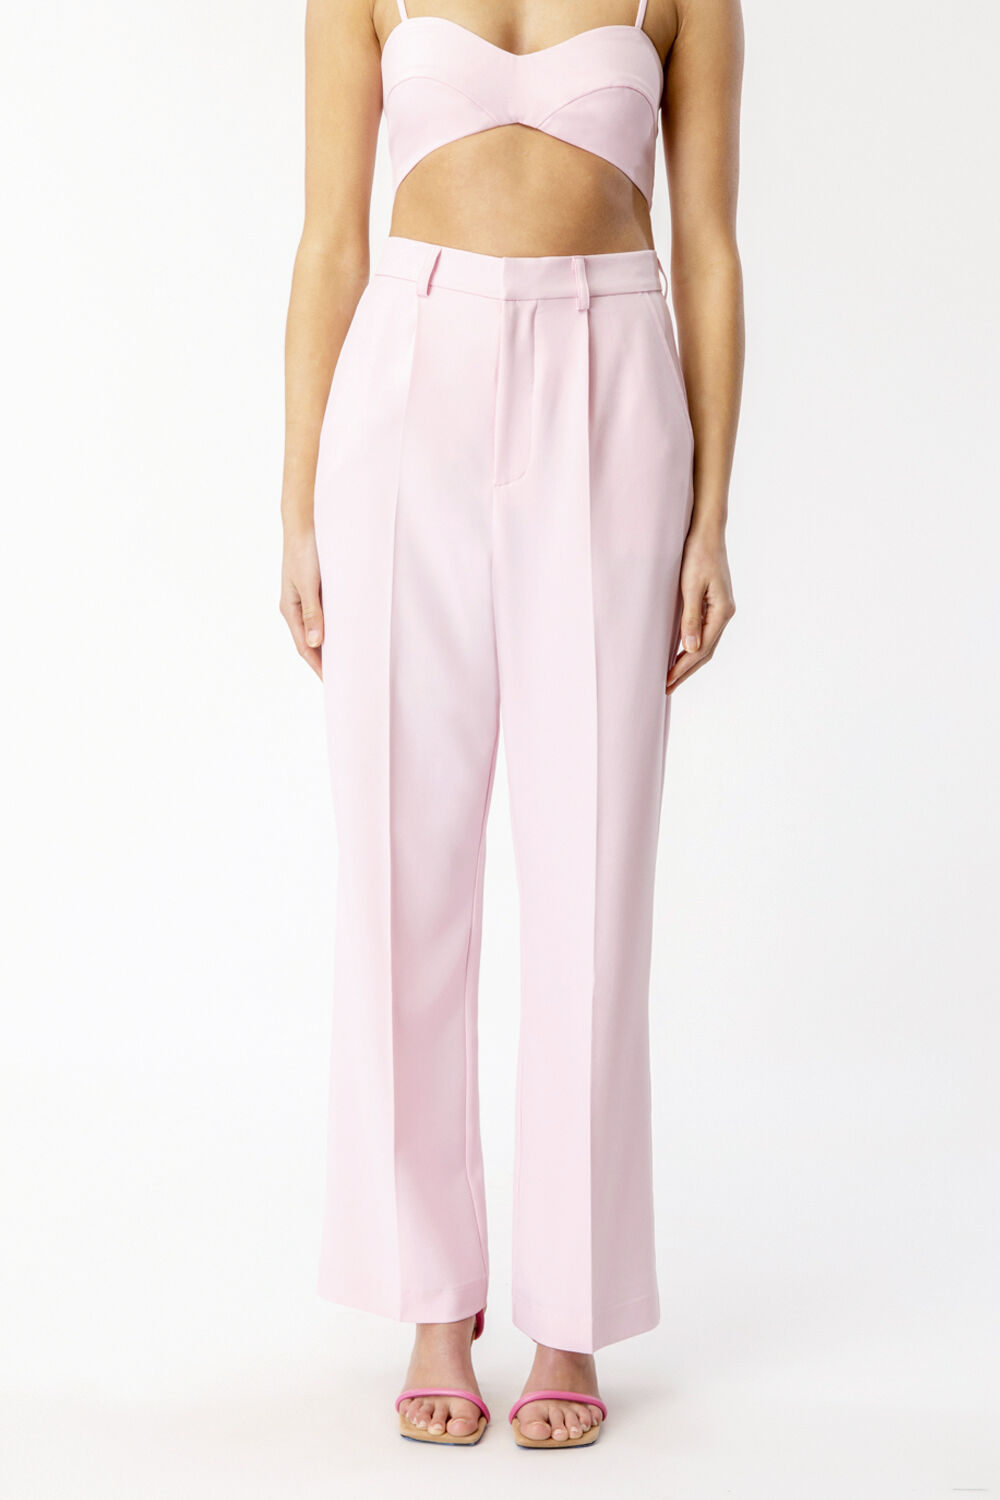 MAISON STRAIGHT LEG PANT in colour SOFT PINK